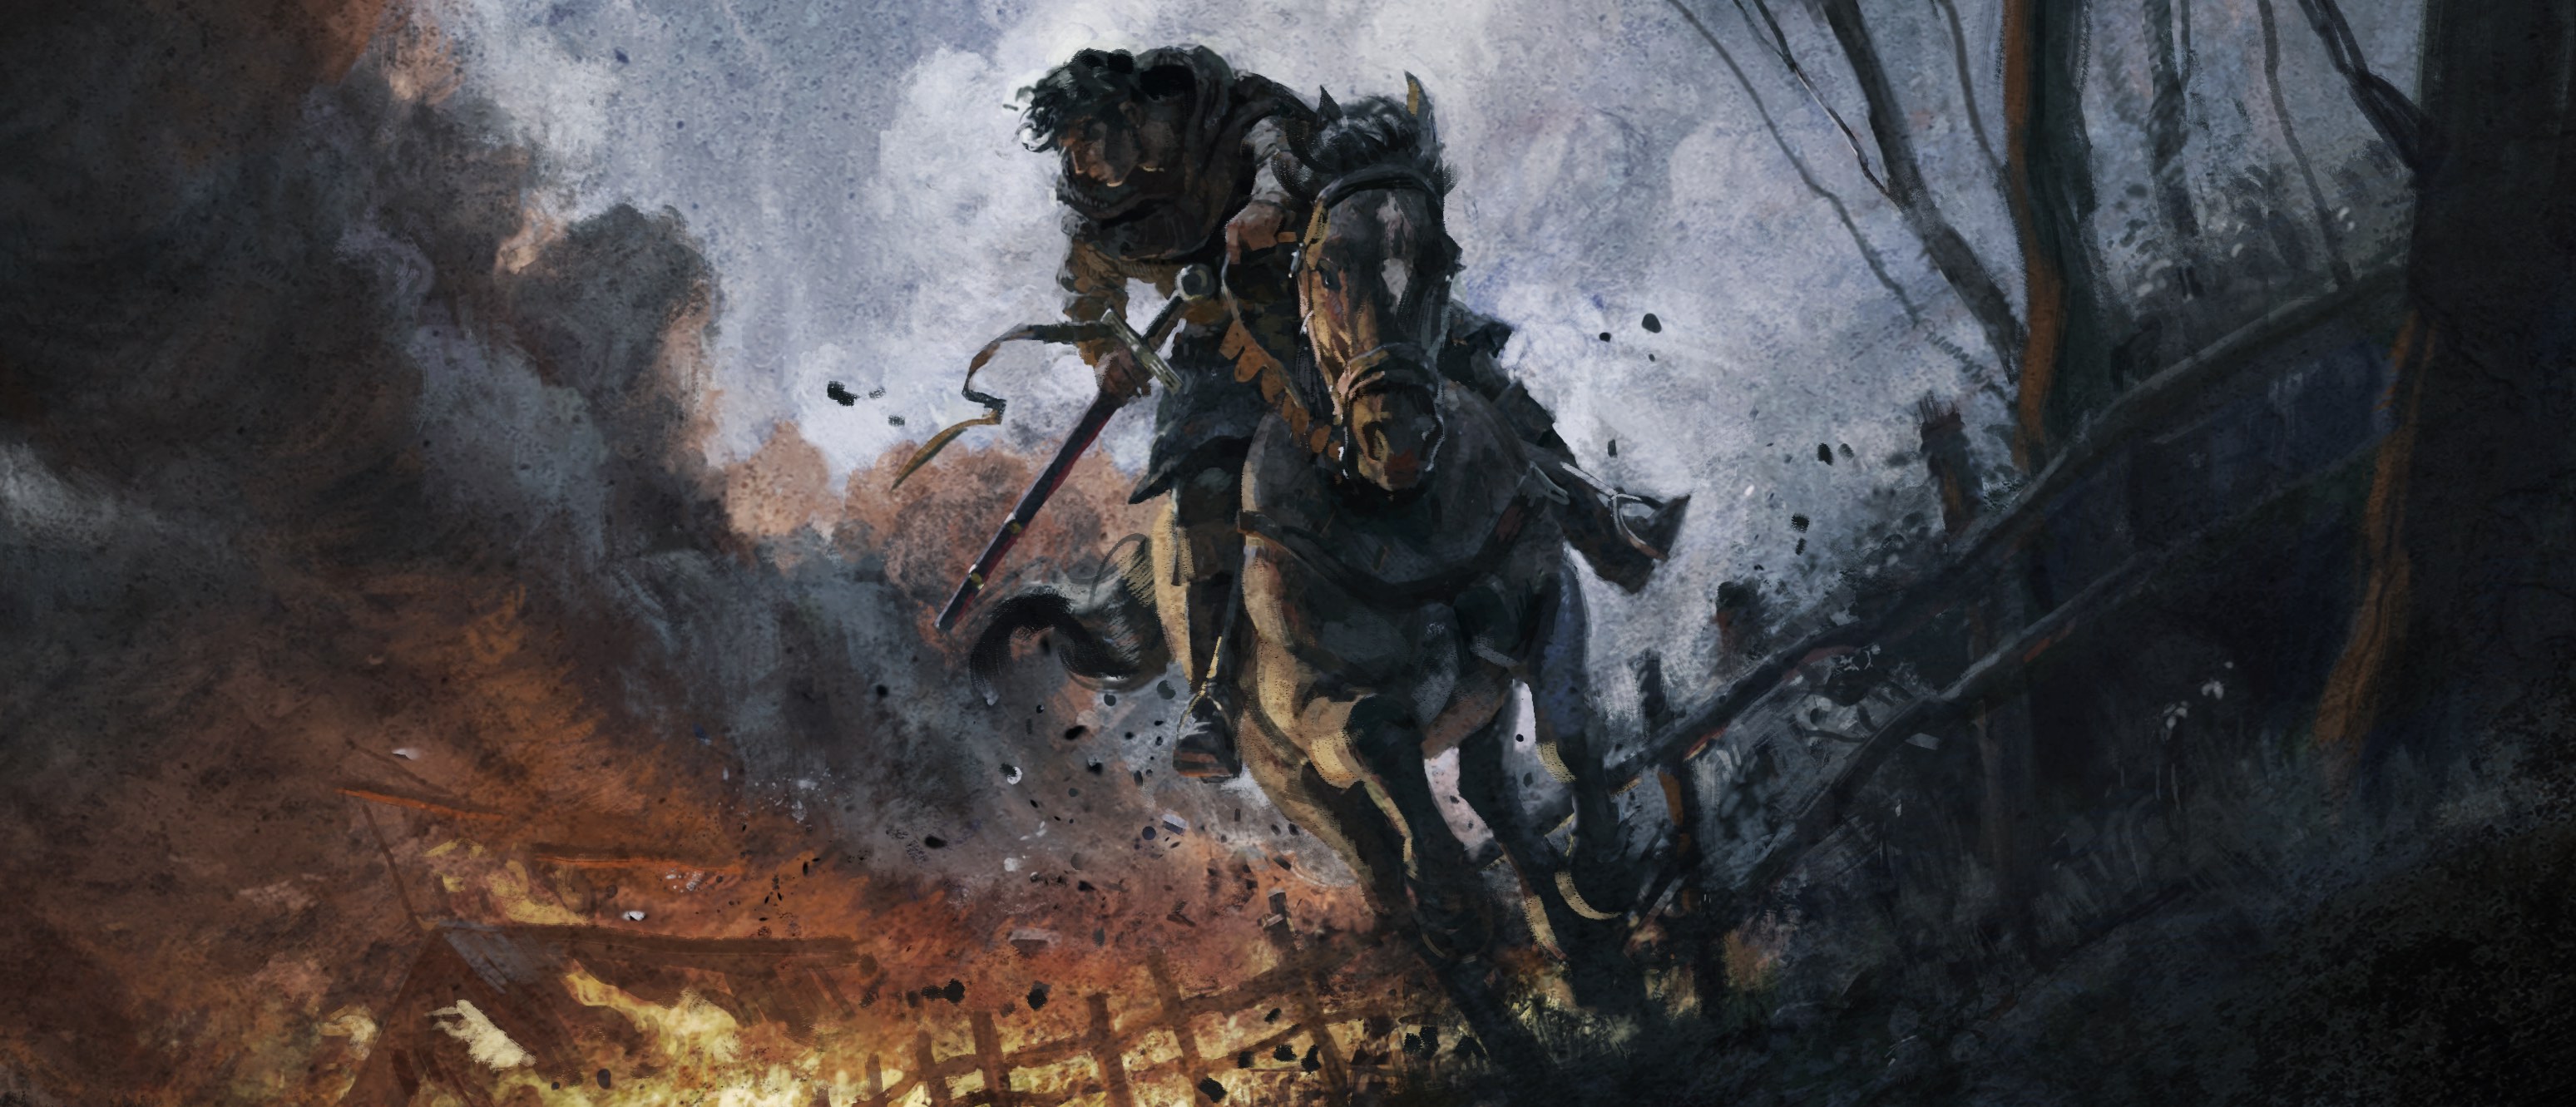 patch file for mount and blade warband 1.168 gog